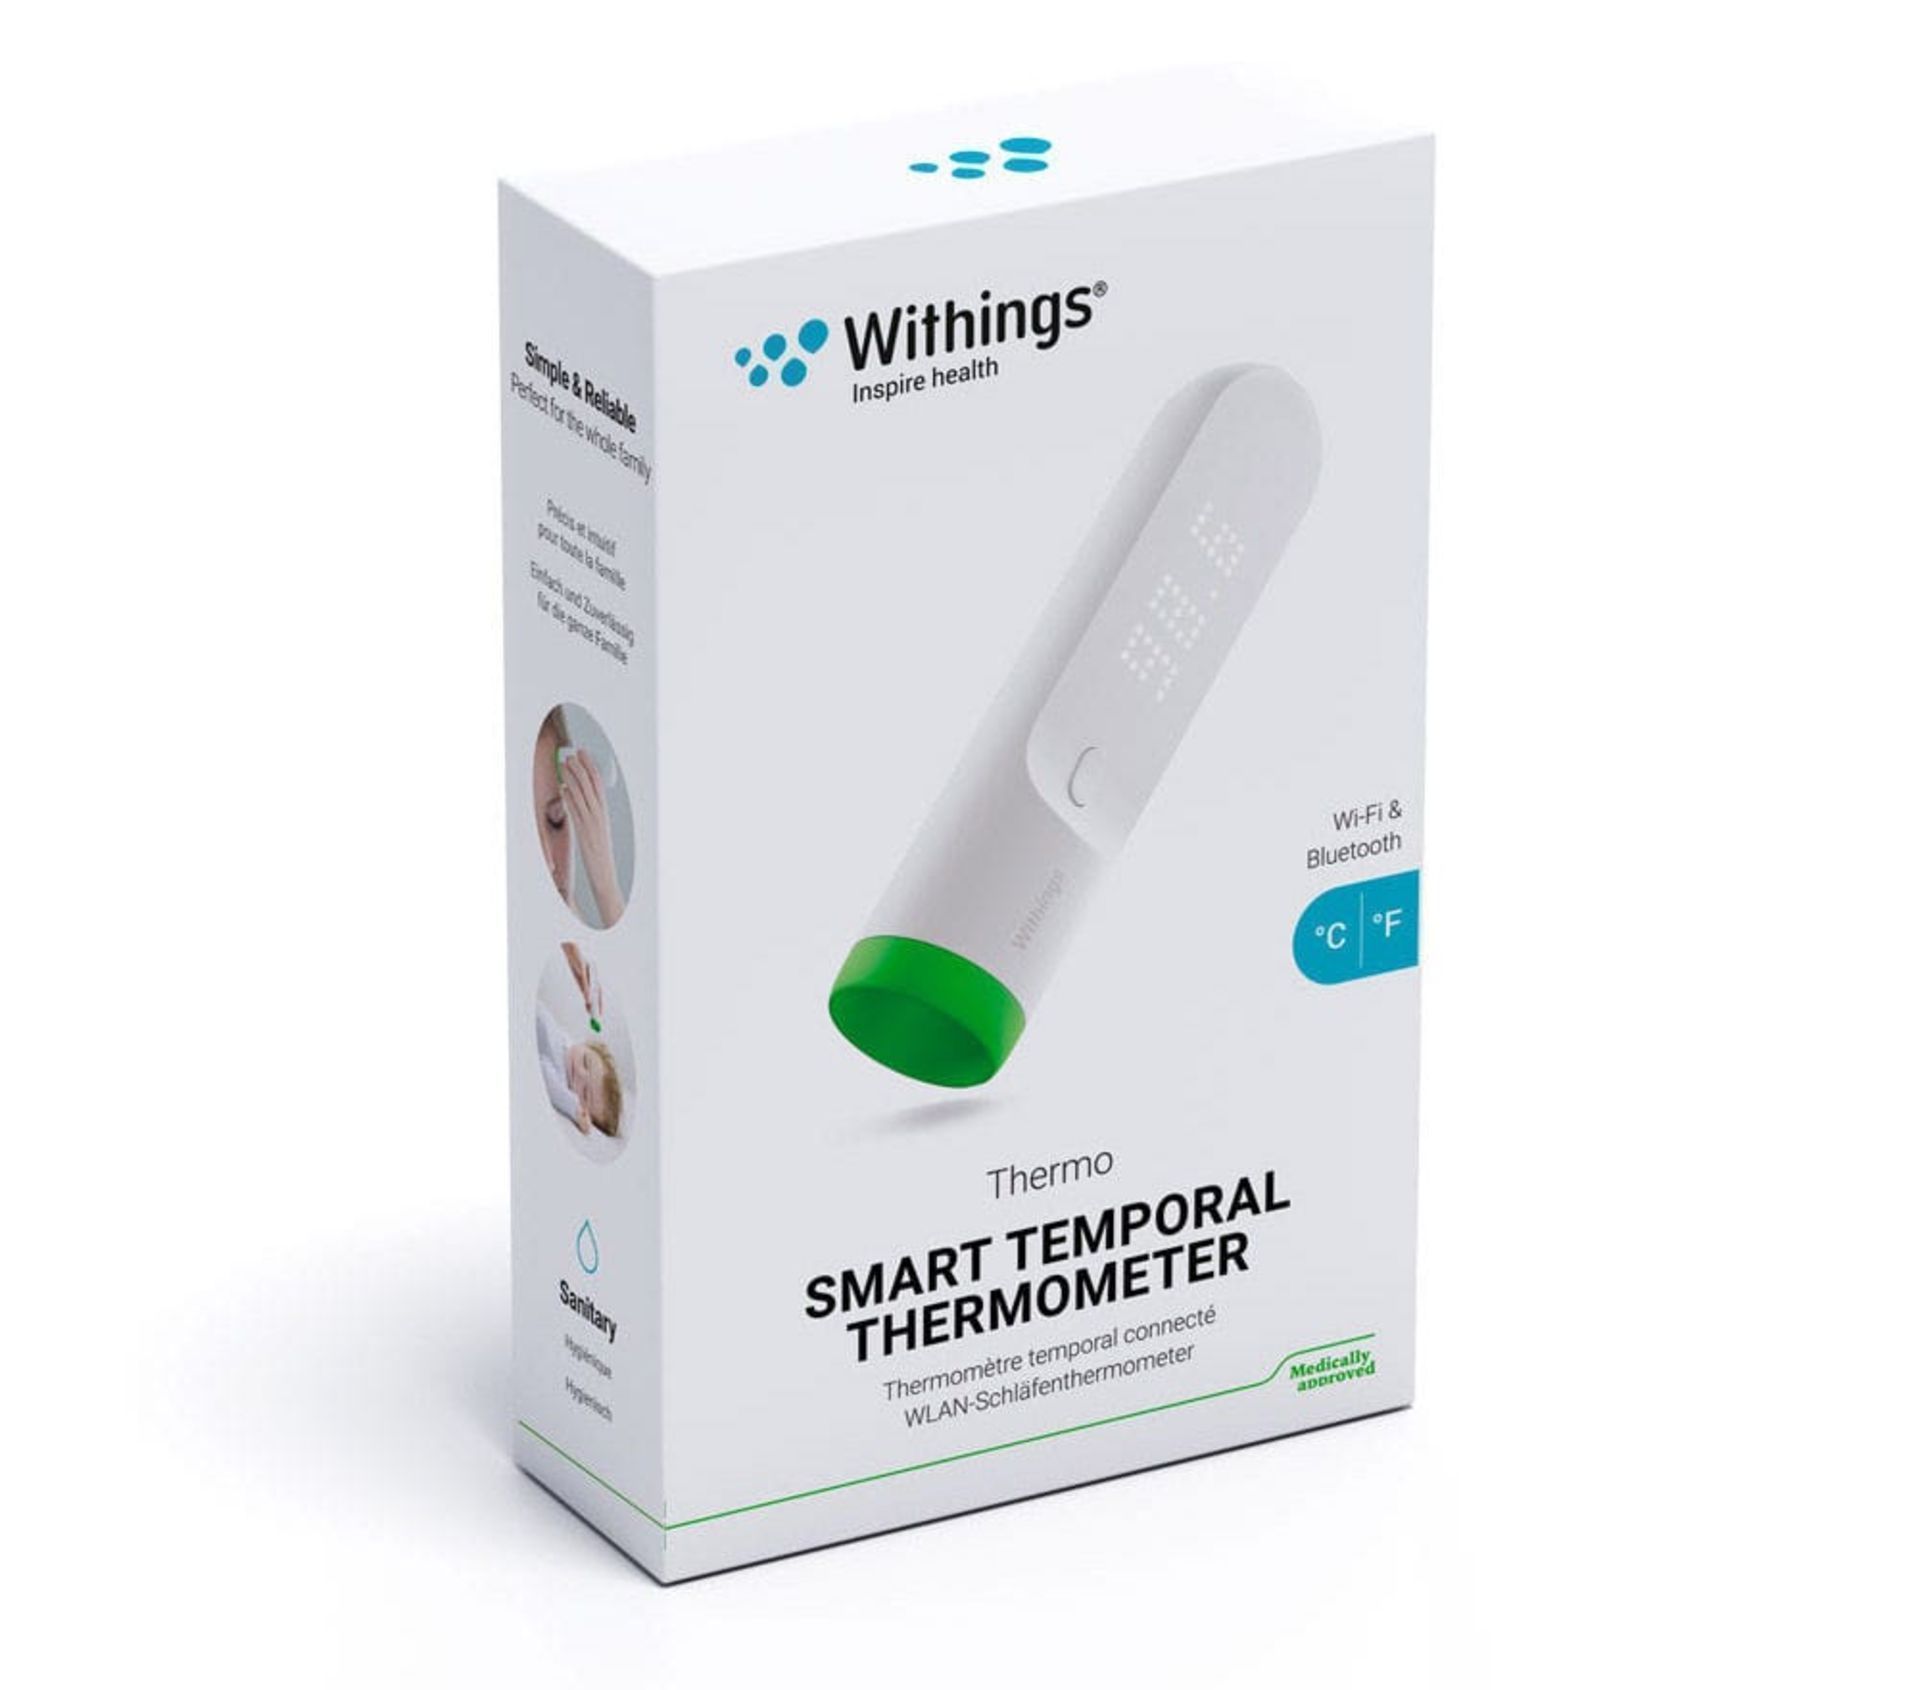 BRAND NEW WITHINGS THERMO SMART TEMPORAL THERMOMETERS RRP £119 EACH R9.7